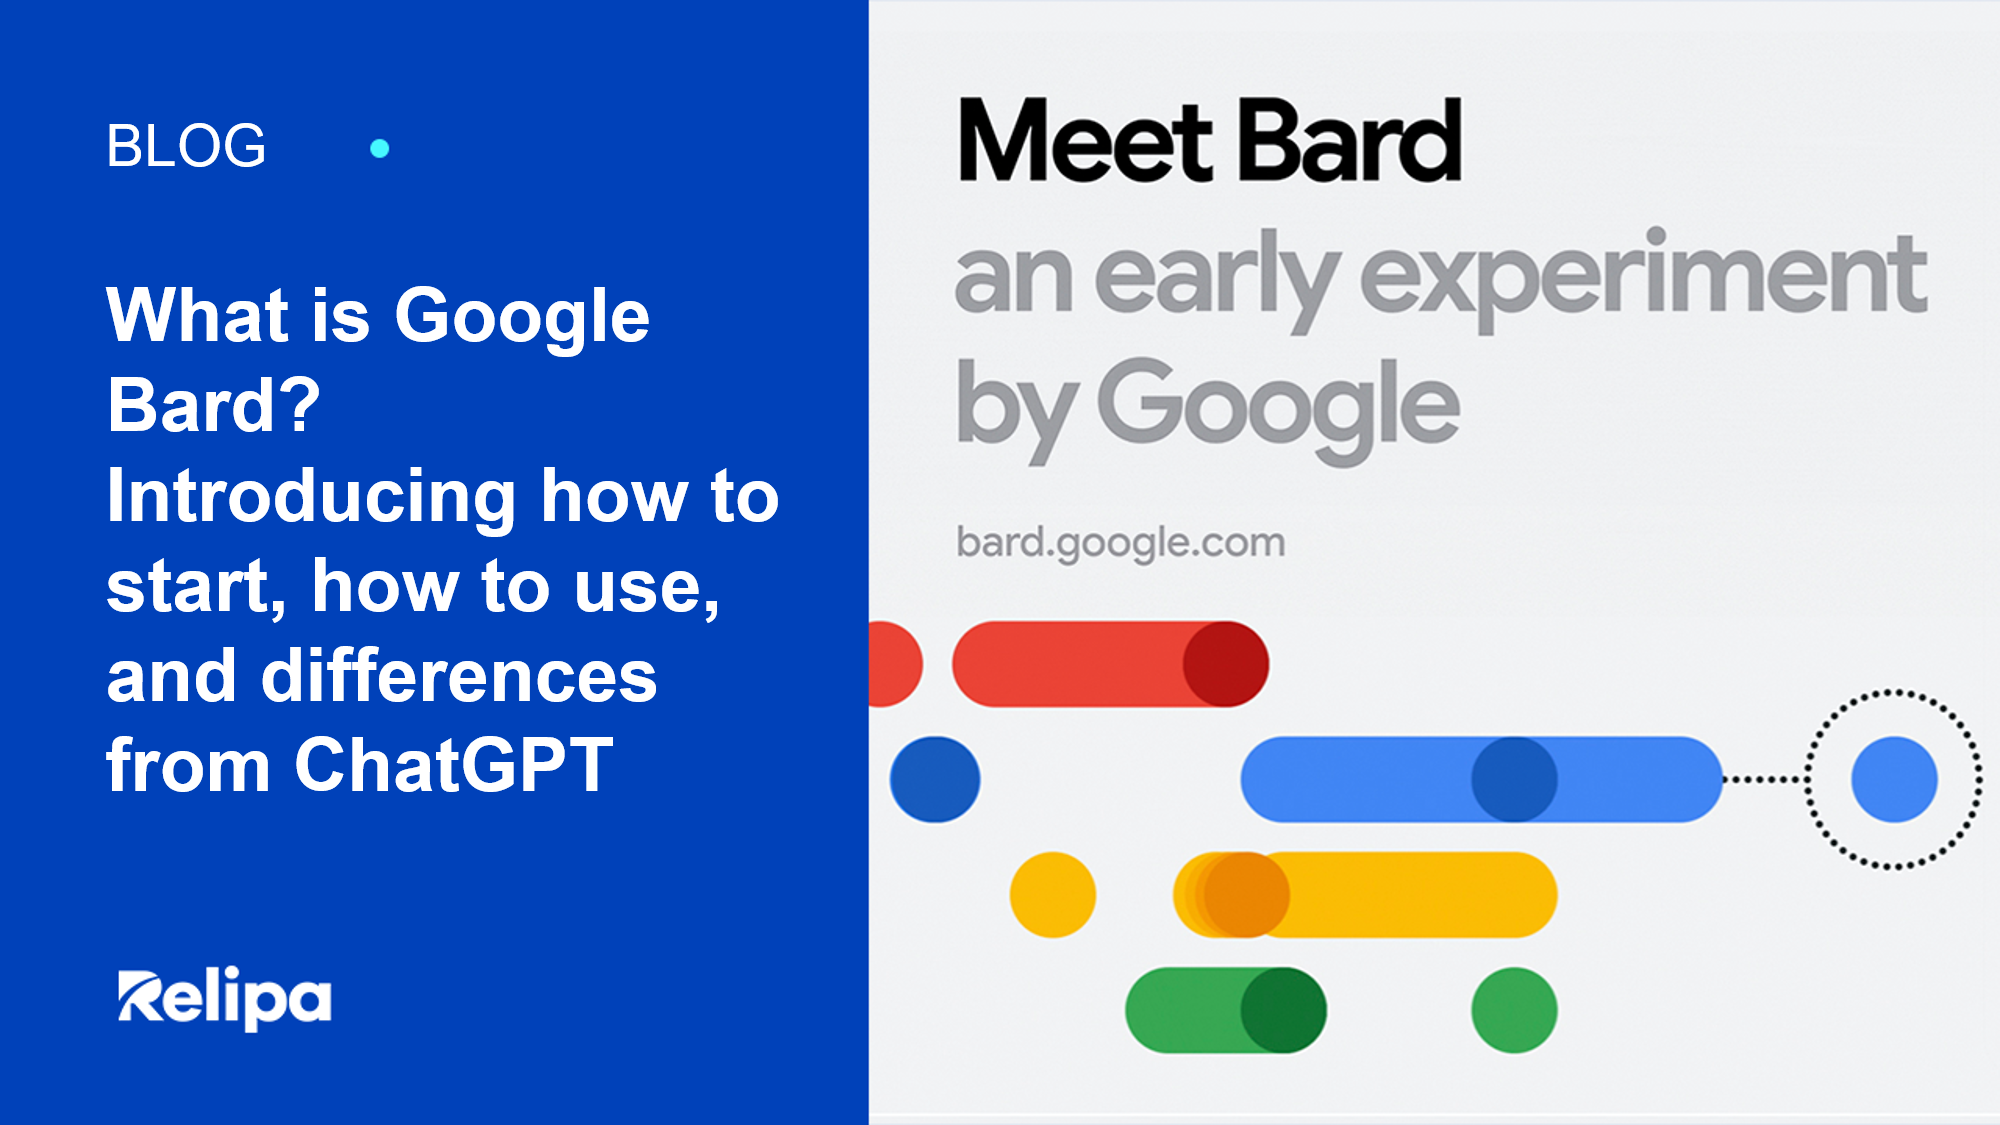 What is Google Bard? Introducing how to start, how to use, and differentiate from ChatGPT